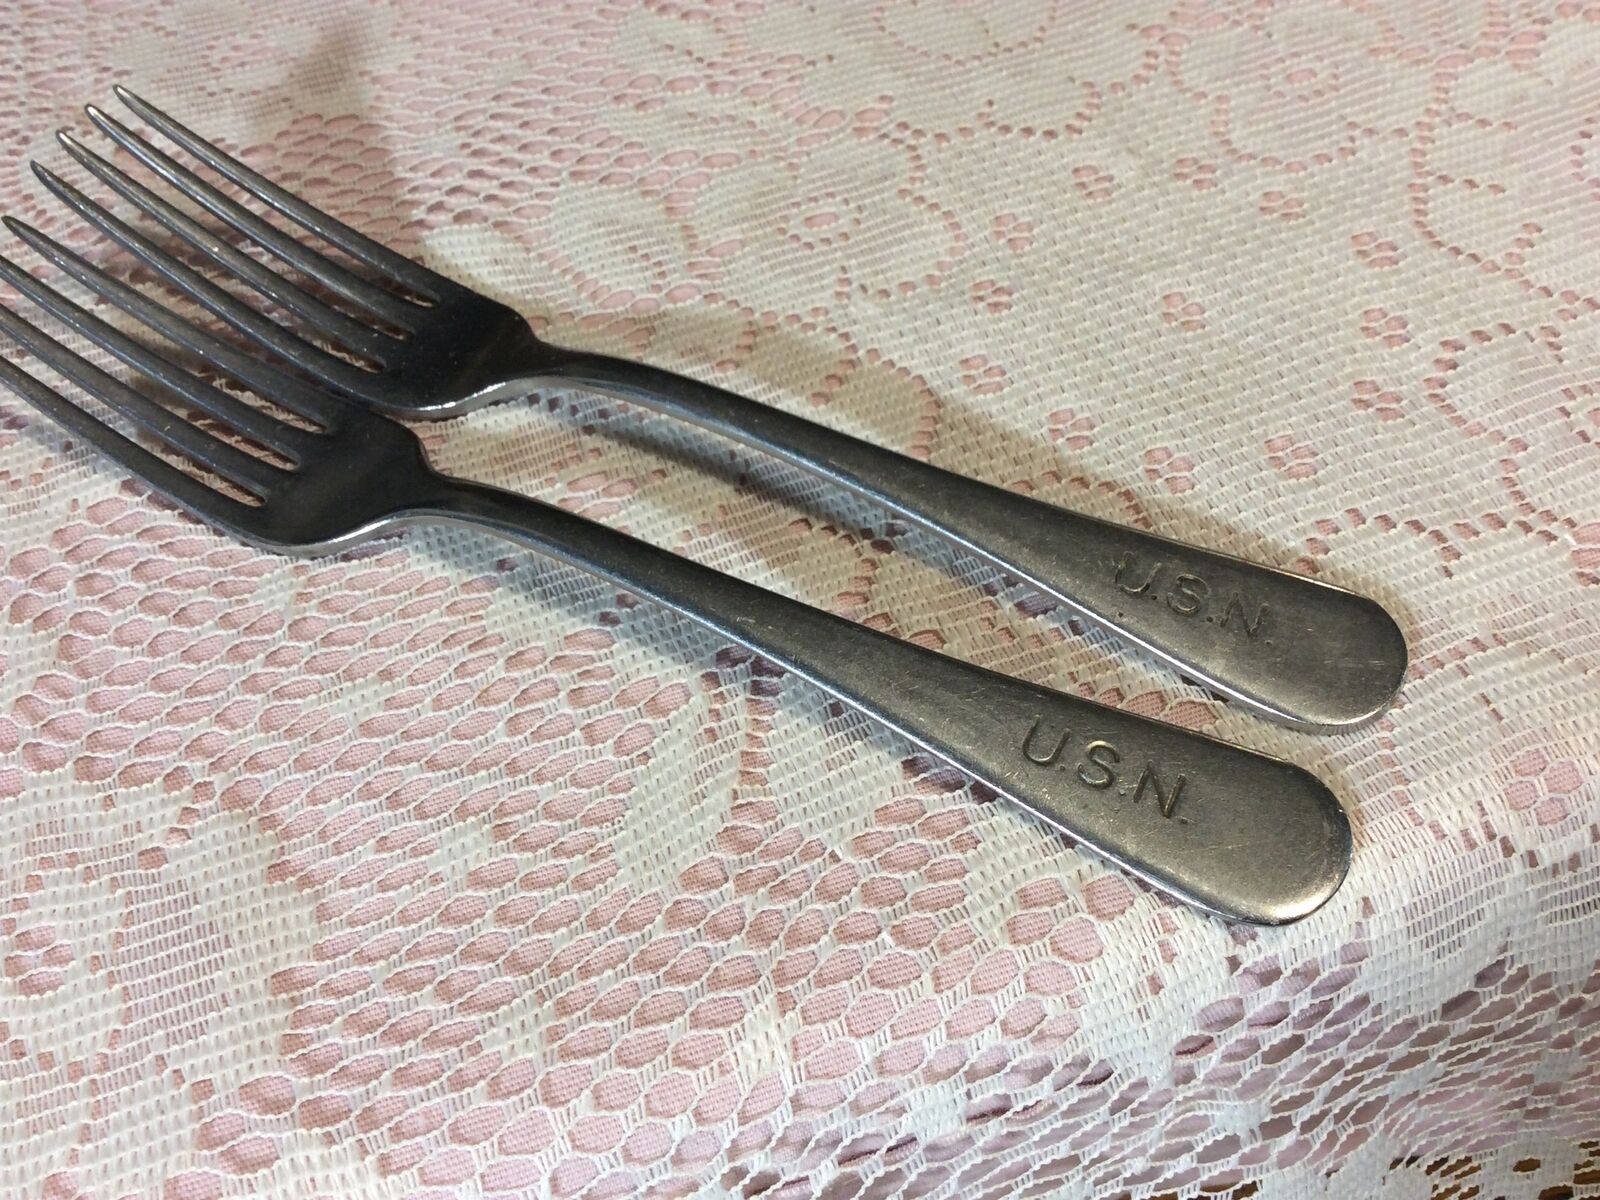 2 Silco USN WWll Galley Forks USN Stainless Steel Military Vintage